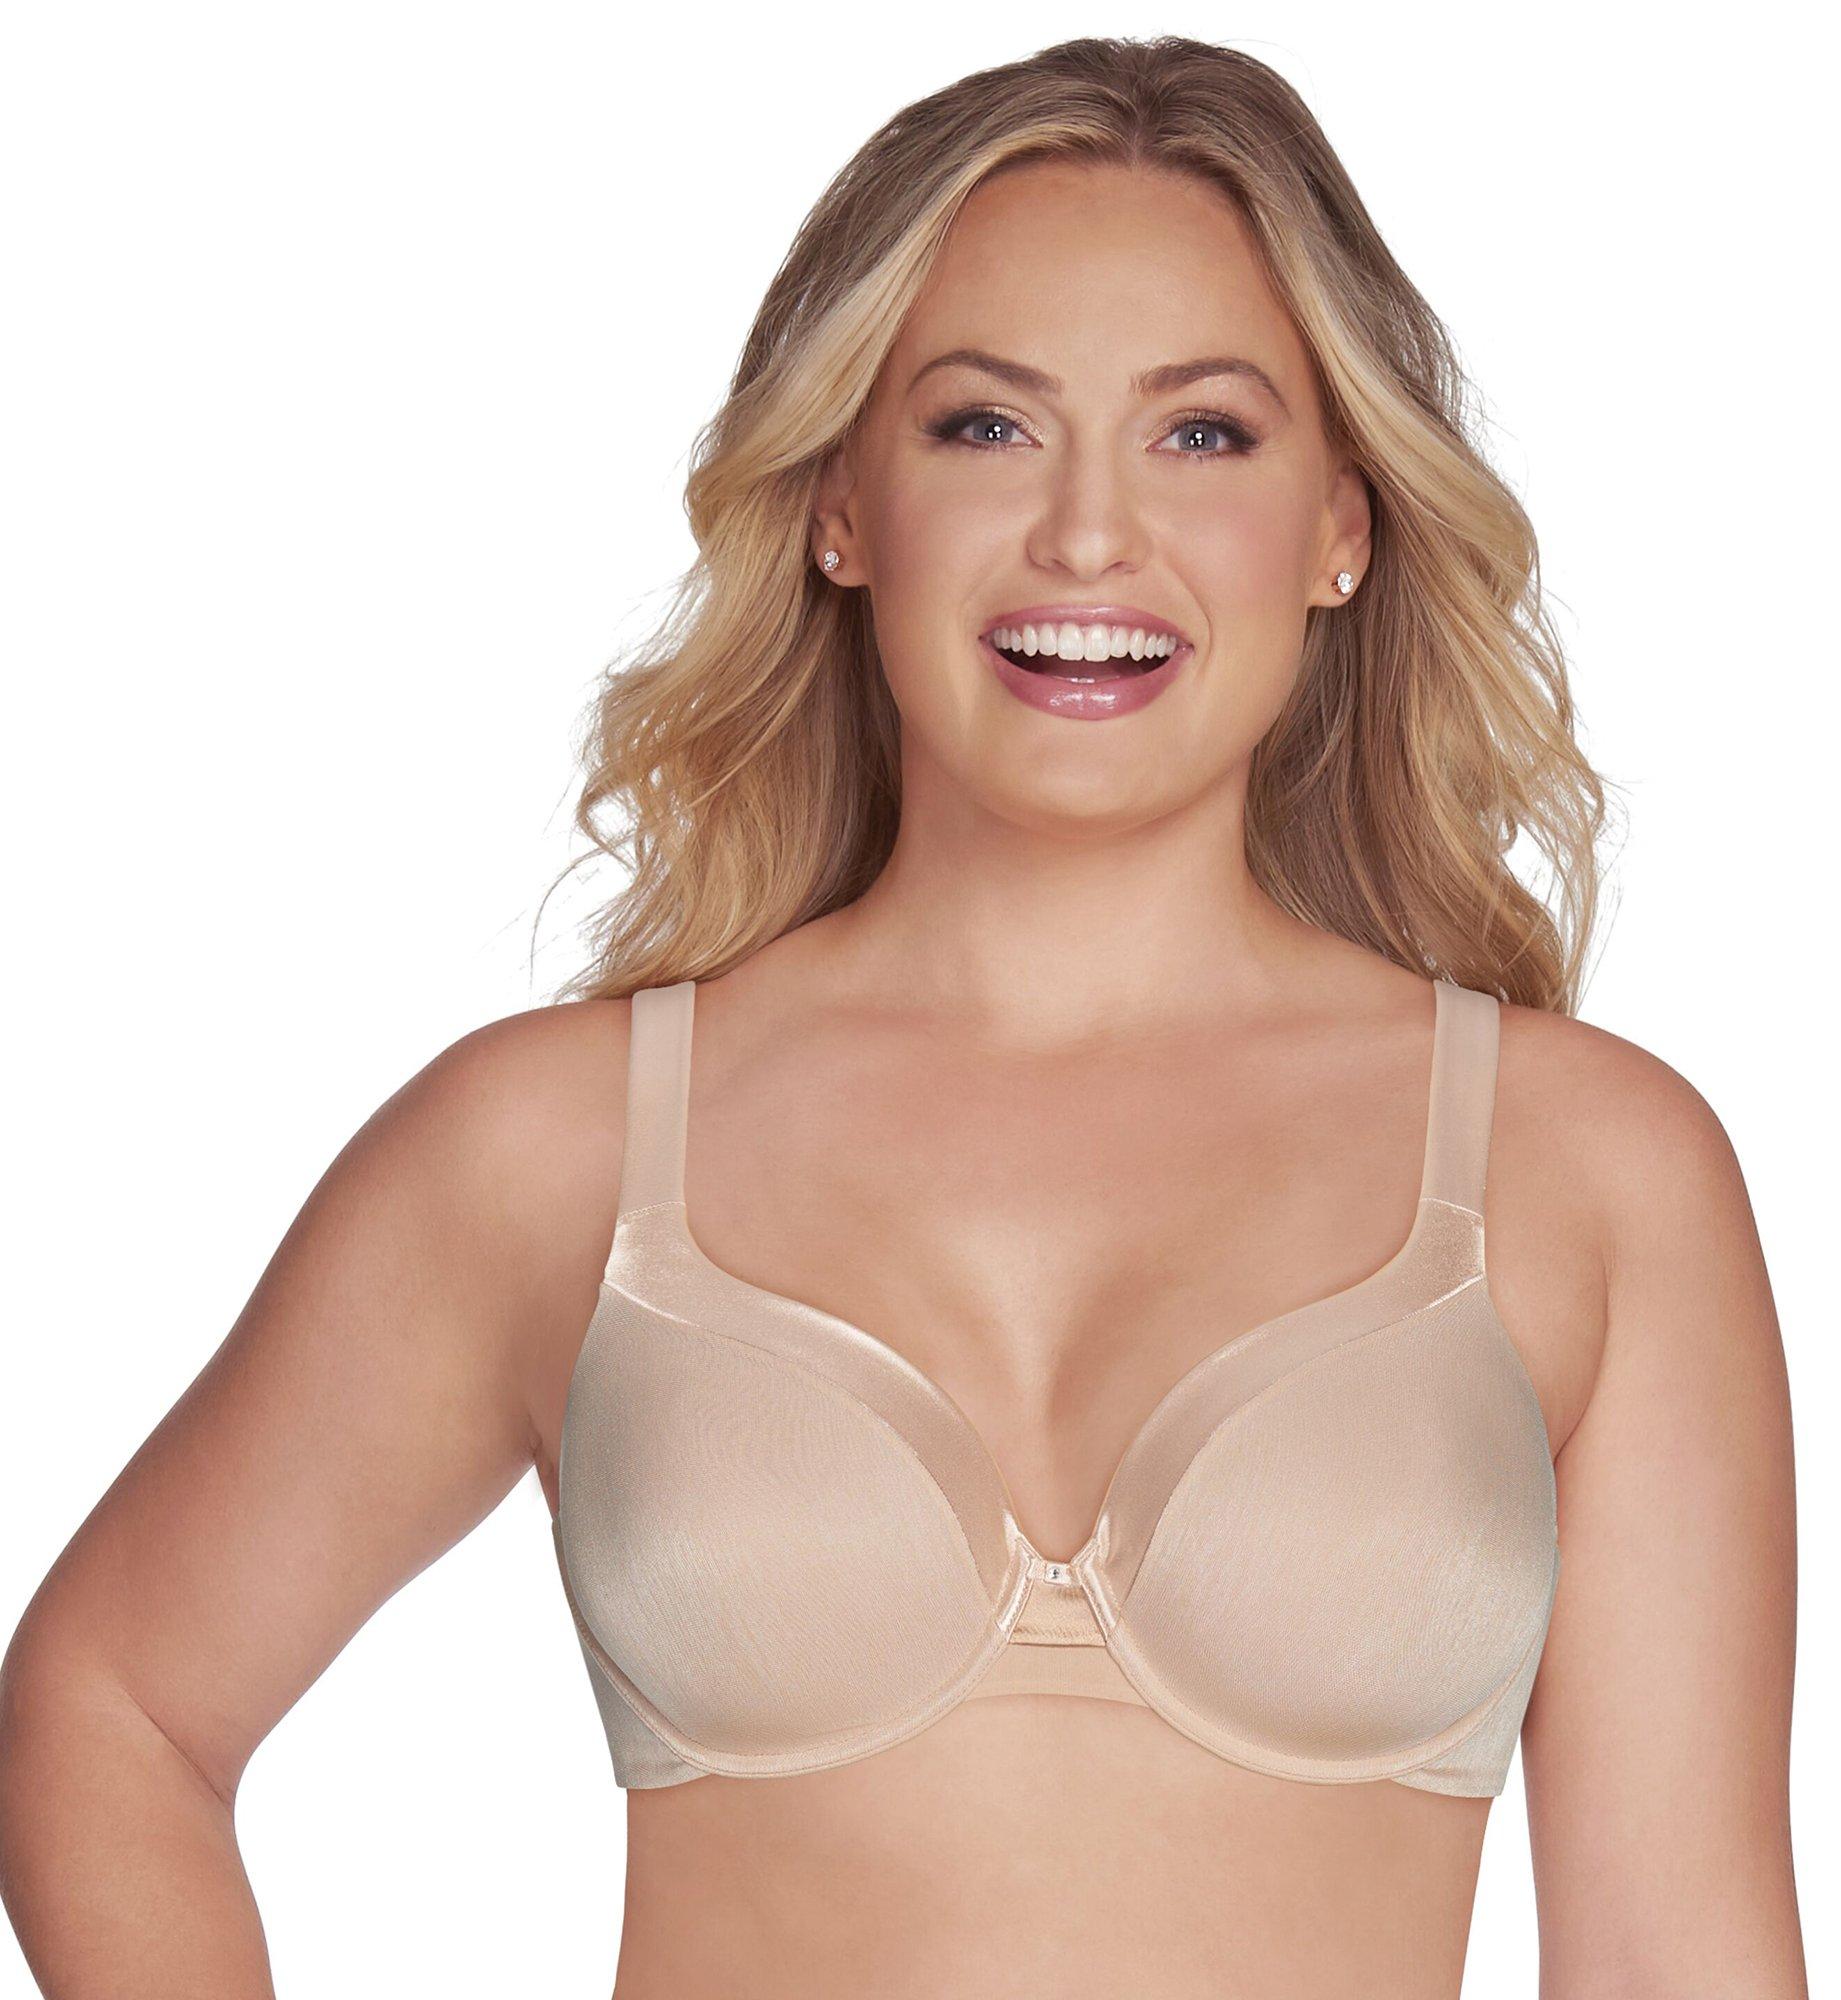 Underwire - All Styles - Bras  Price: $40.00 - $49.99; Collection